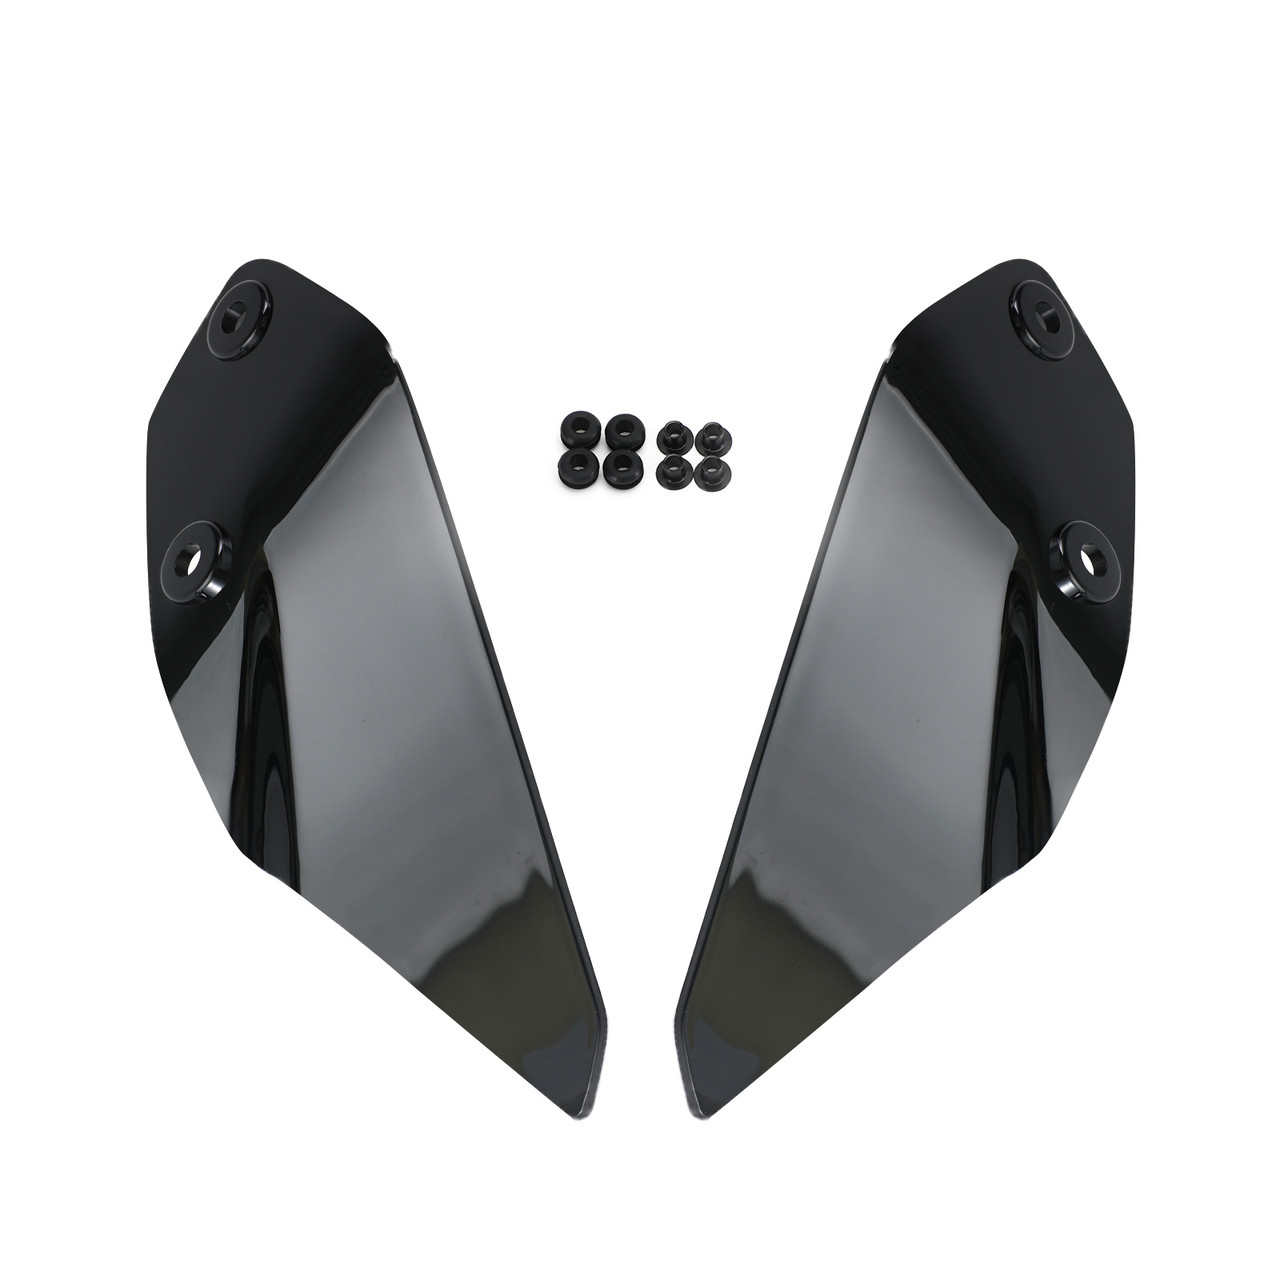 Windshield Plate Side Panels Fit for BMW R1200GS ADV 2014-2020 R1250GS ADV 2019-2021 Black